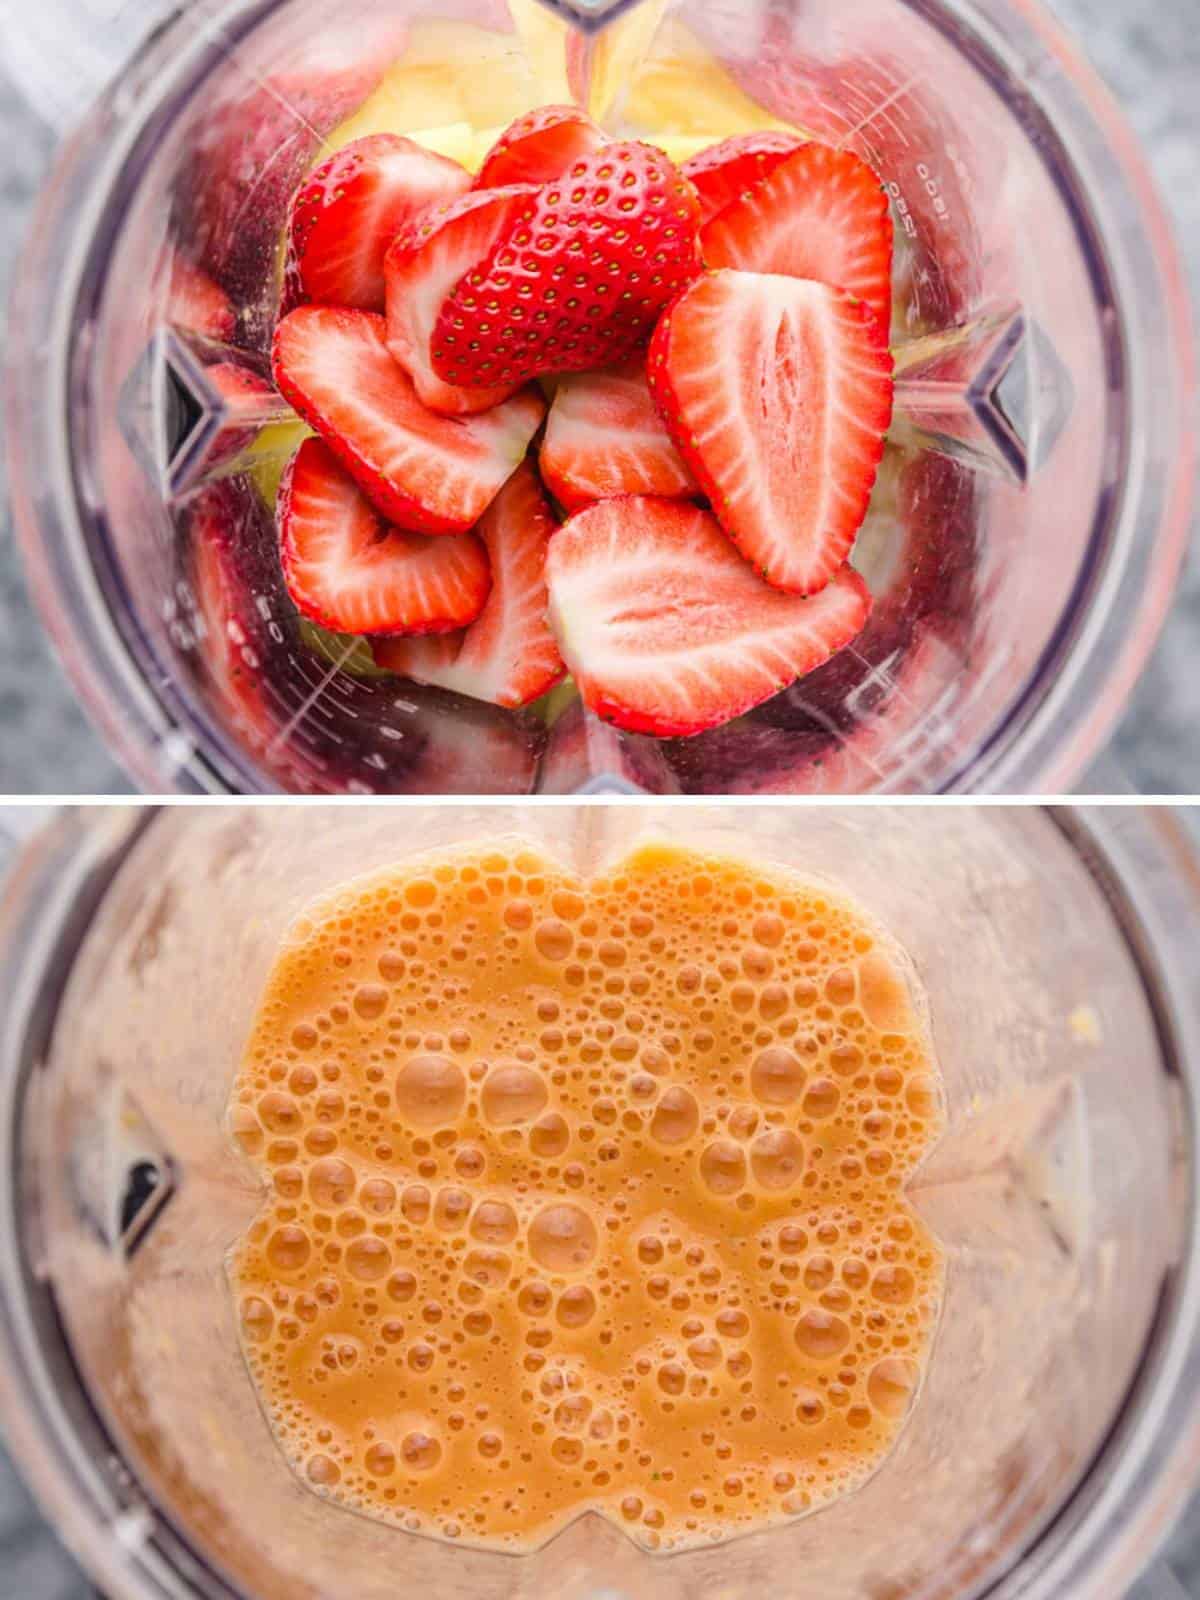 Steps on how to make a smoothie